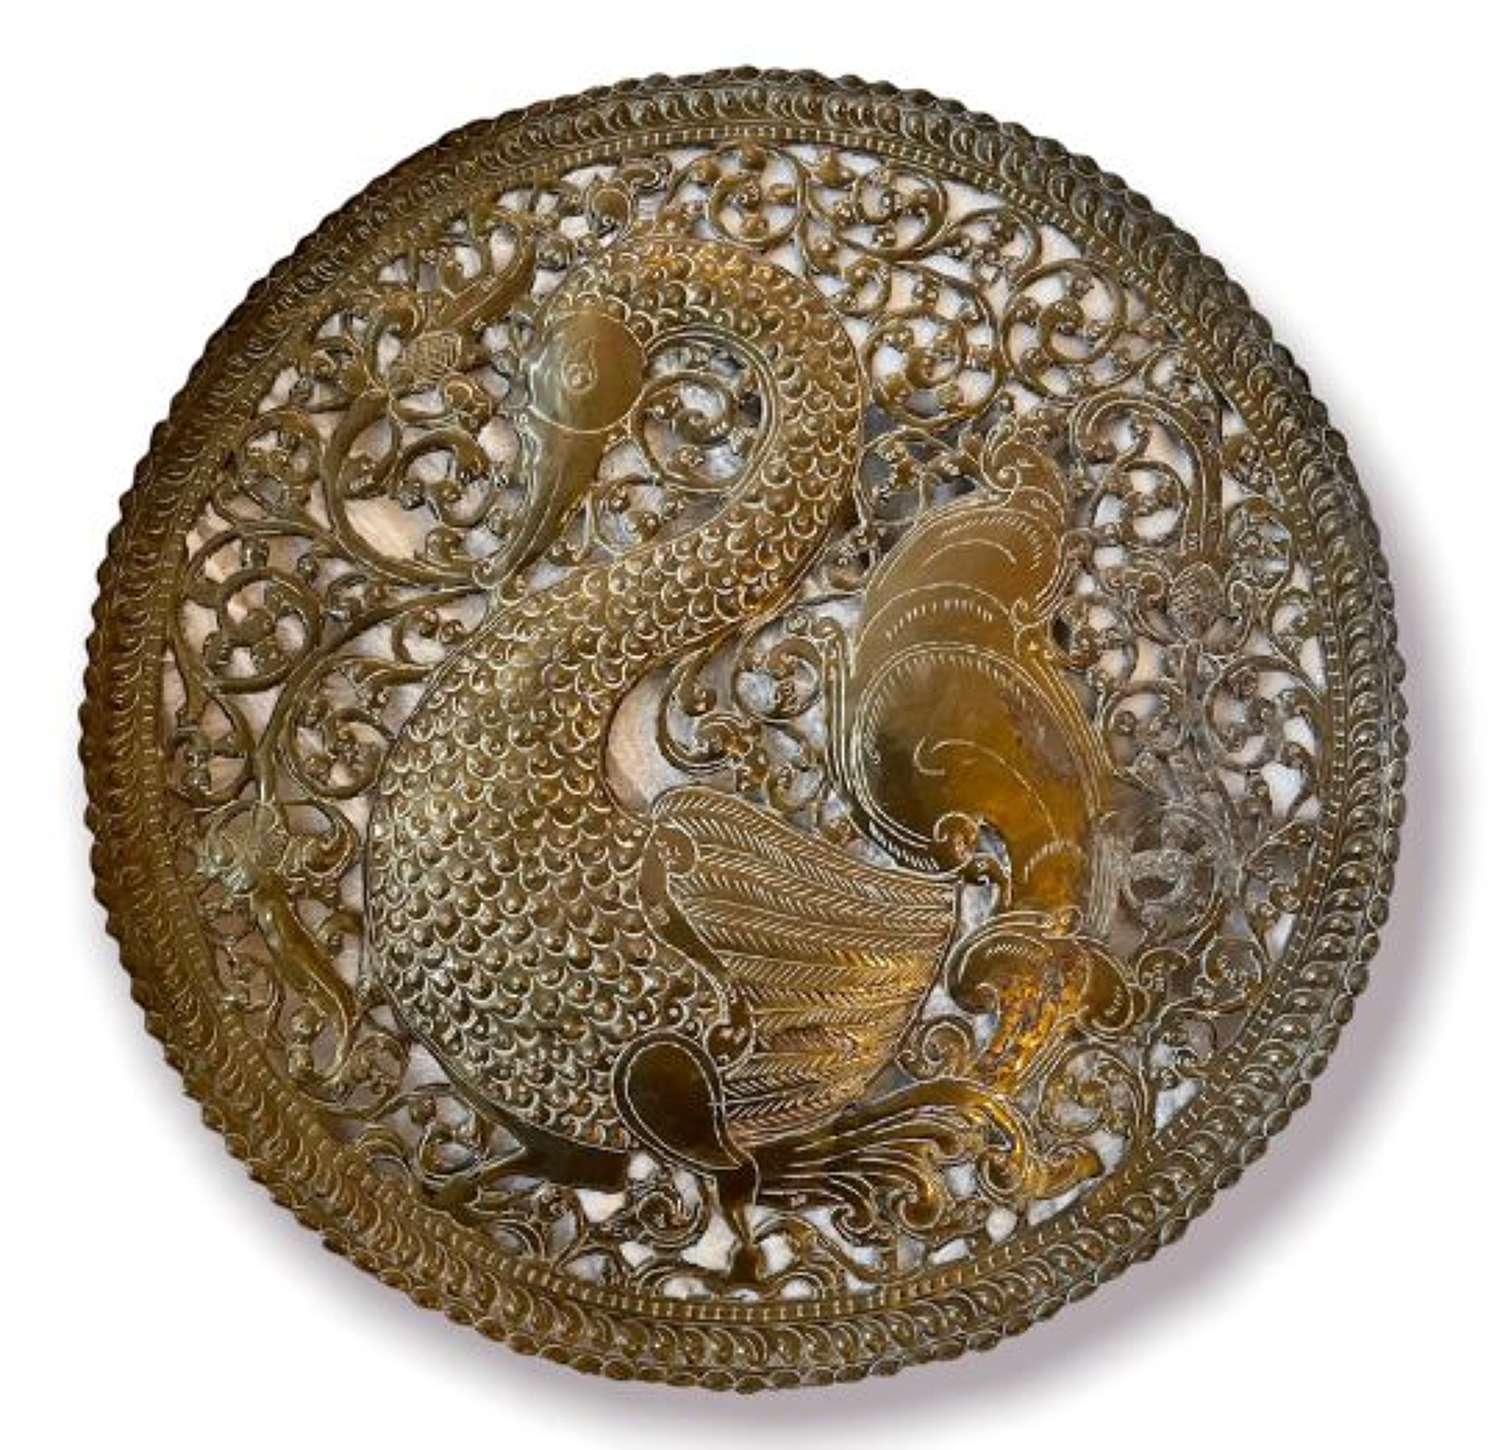 Antique brass panel depicting a swan